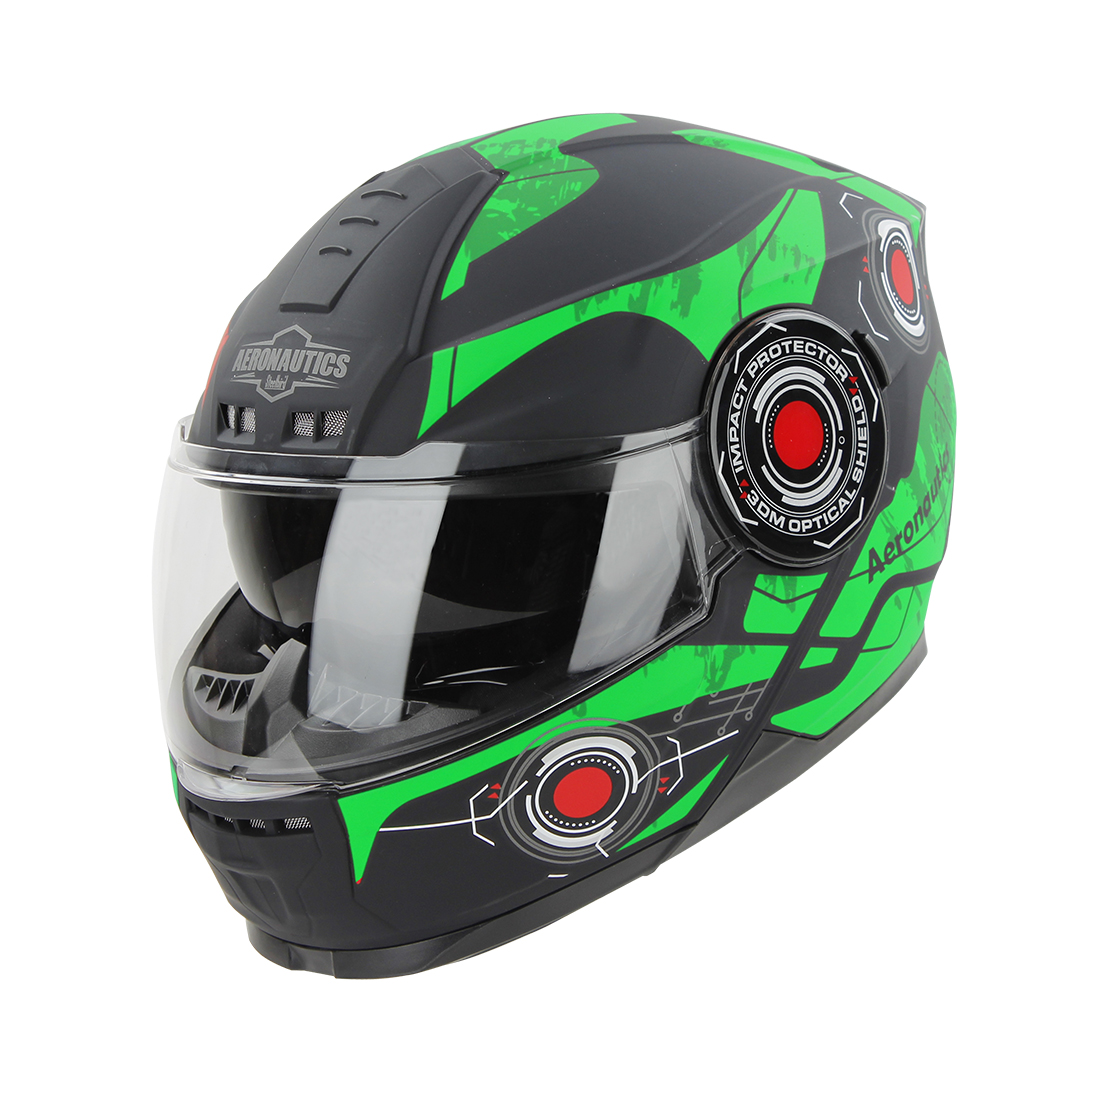 Steelbird SBH-40 Cyber ISI Certified Full Face Graphic Helmet for Men and Women with Inner Sun Shield (Glossy Black Green)